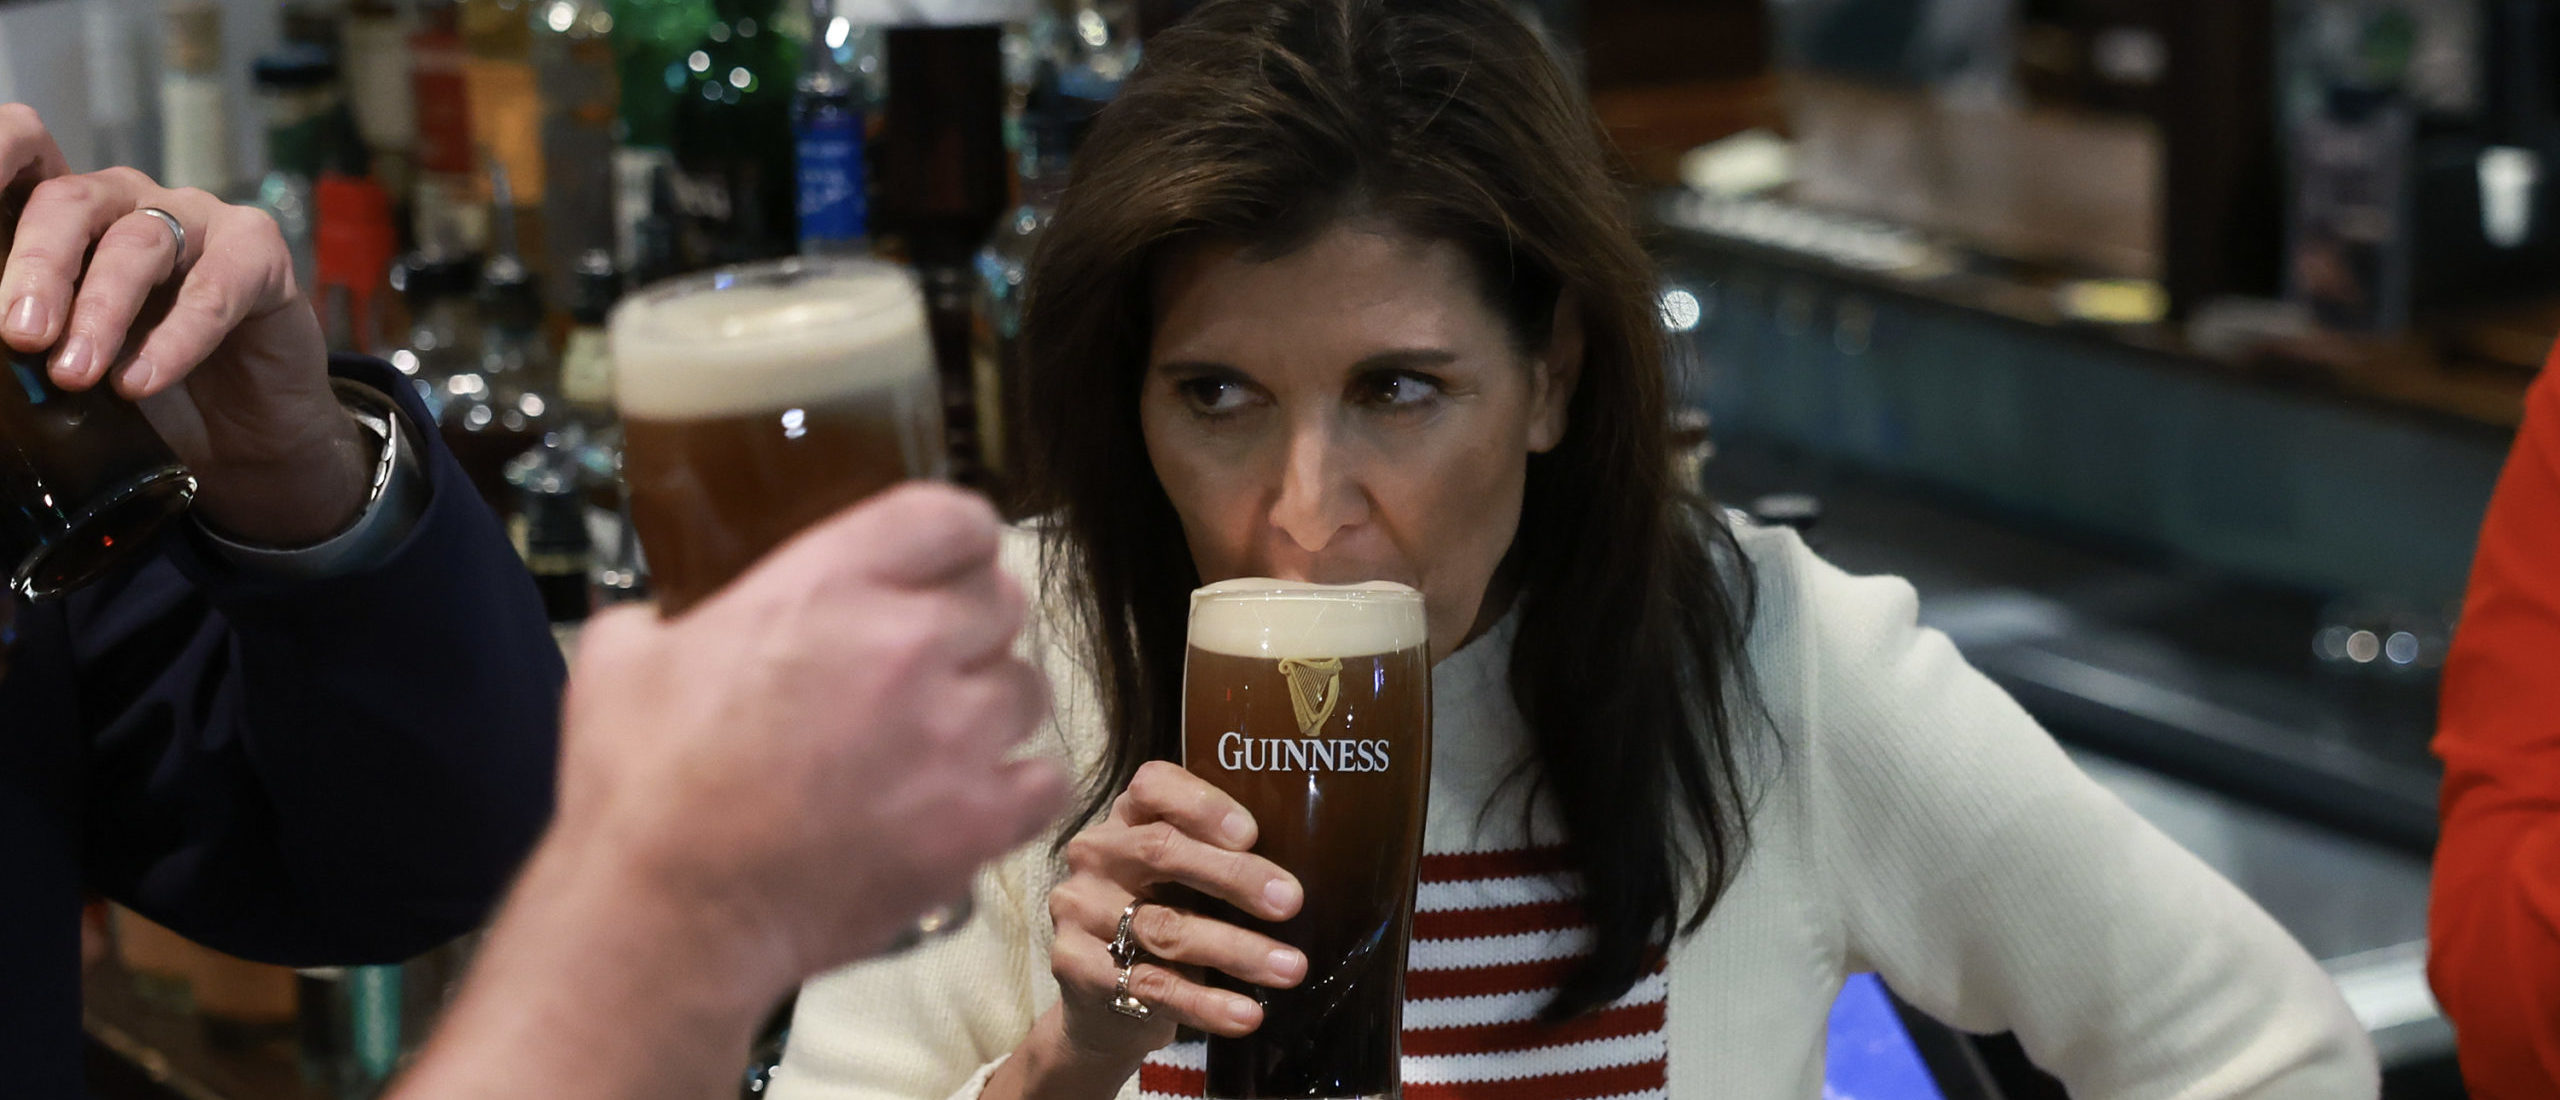 NASHUA, NEW HAMPSHIRE - JANUARY 20: Republican presidential candidate former U.N. Ambassador Nikki Haley enjoys a beer as she visits The Peddler's Daughter on January 20, 2024 in Nashua, New Hampshire. Haley continues to campaign across the state. (Photo by Joe Raedle/Getty Images)